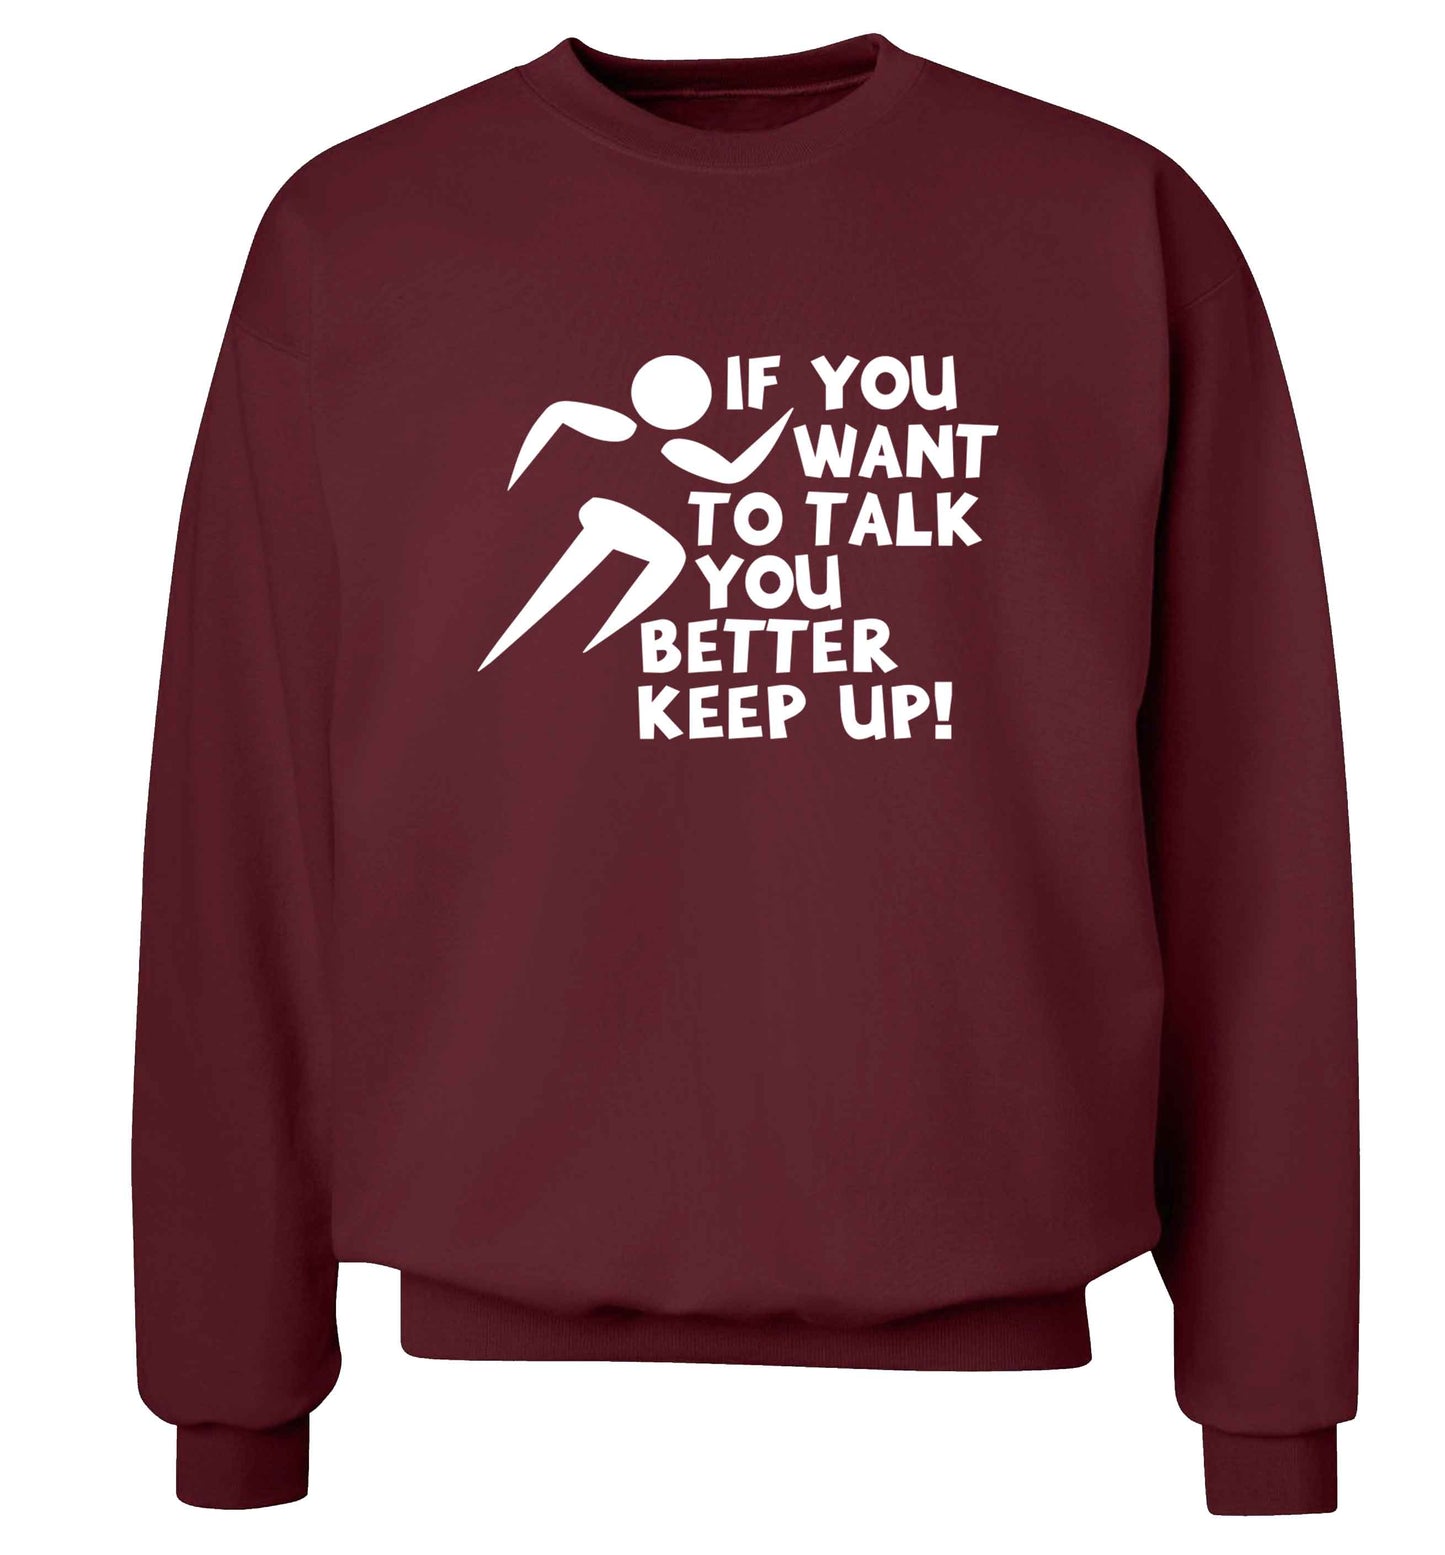 If you want to talk you better keep up! adult's unisex maroon sweater 2XL